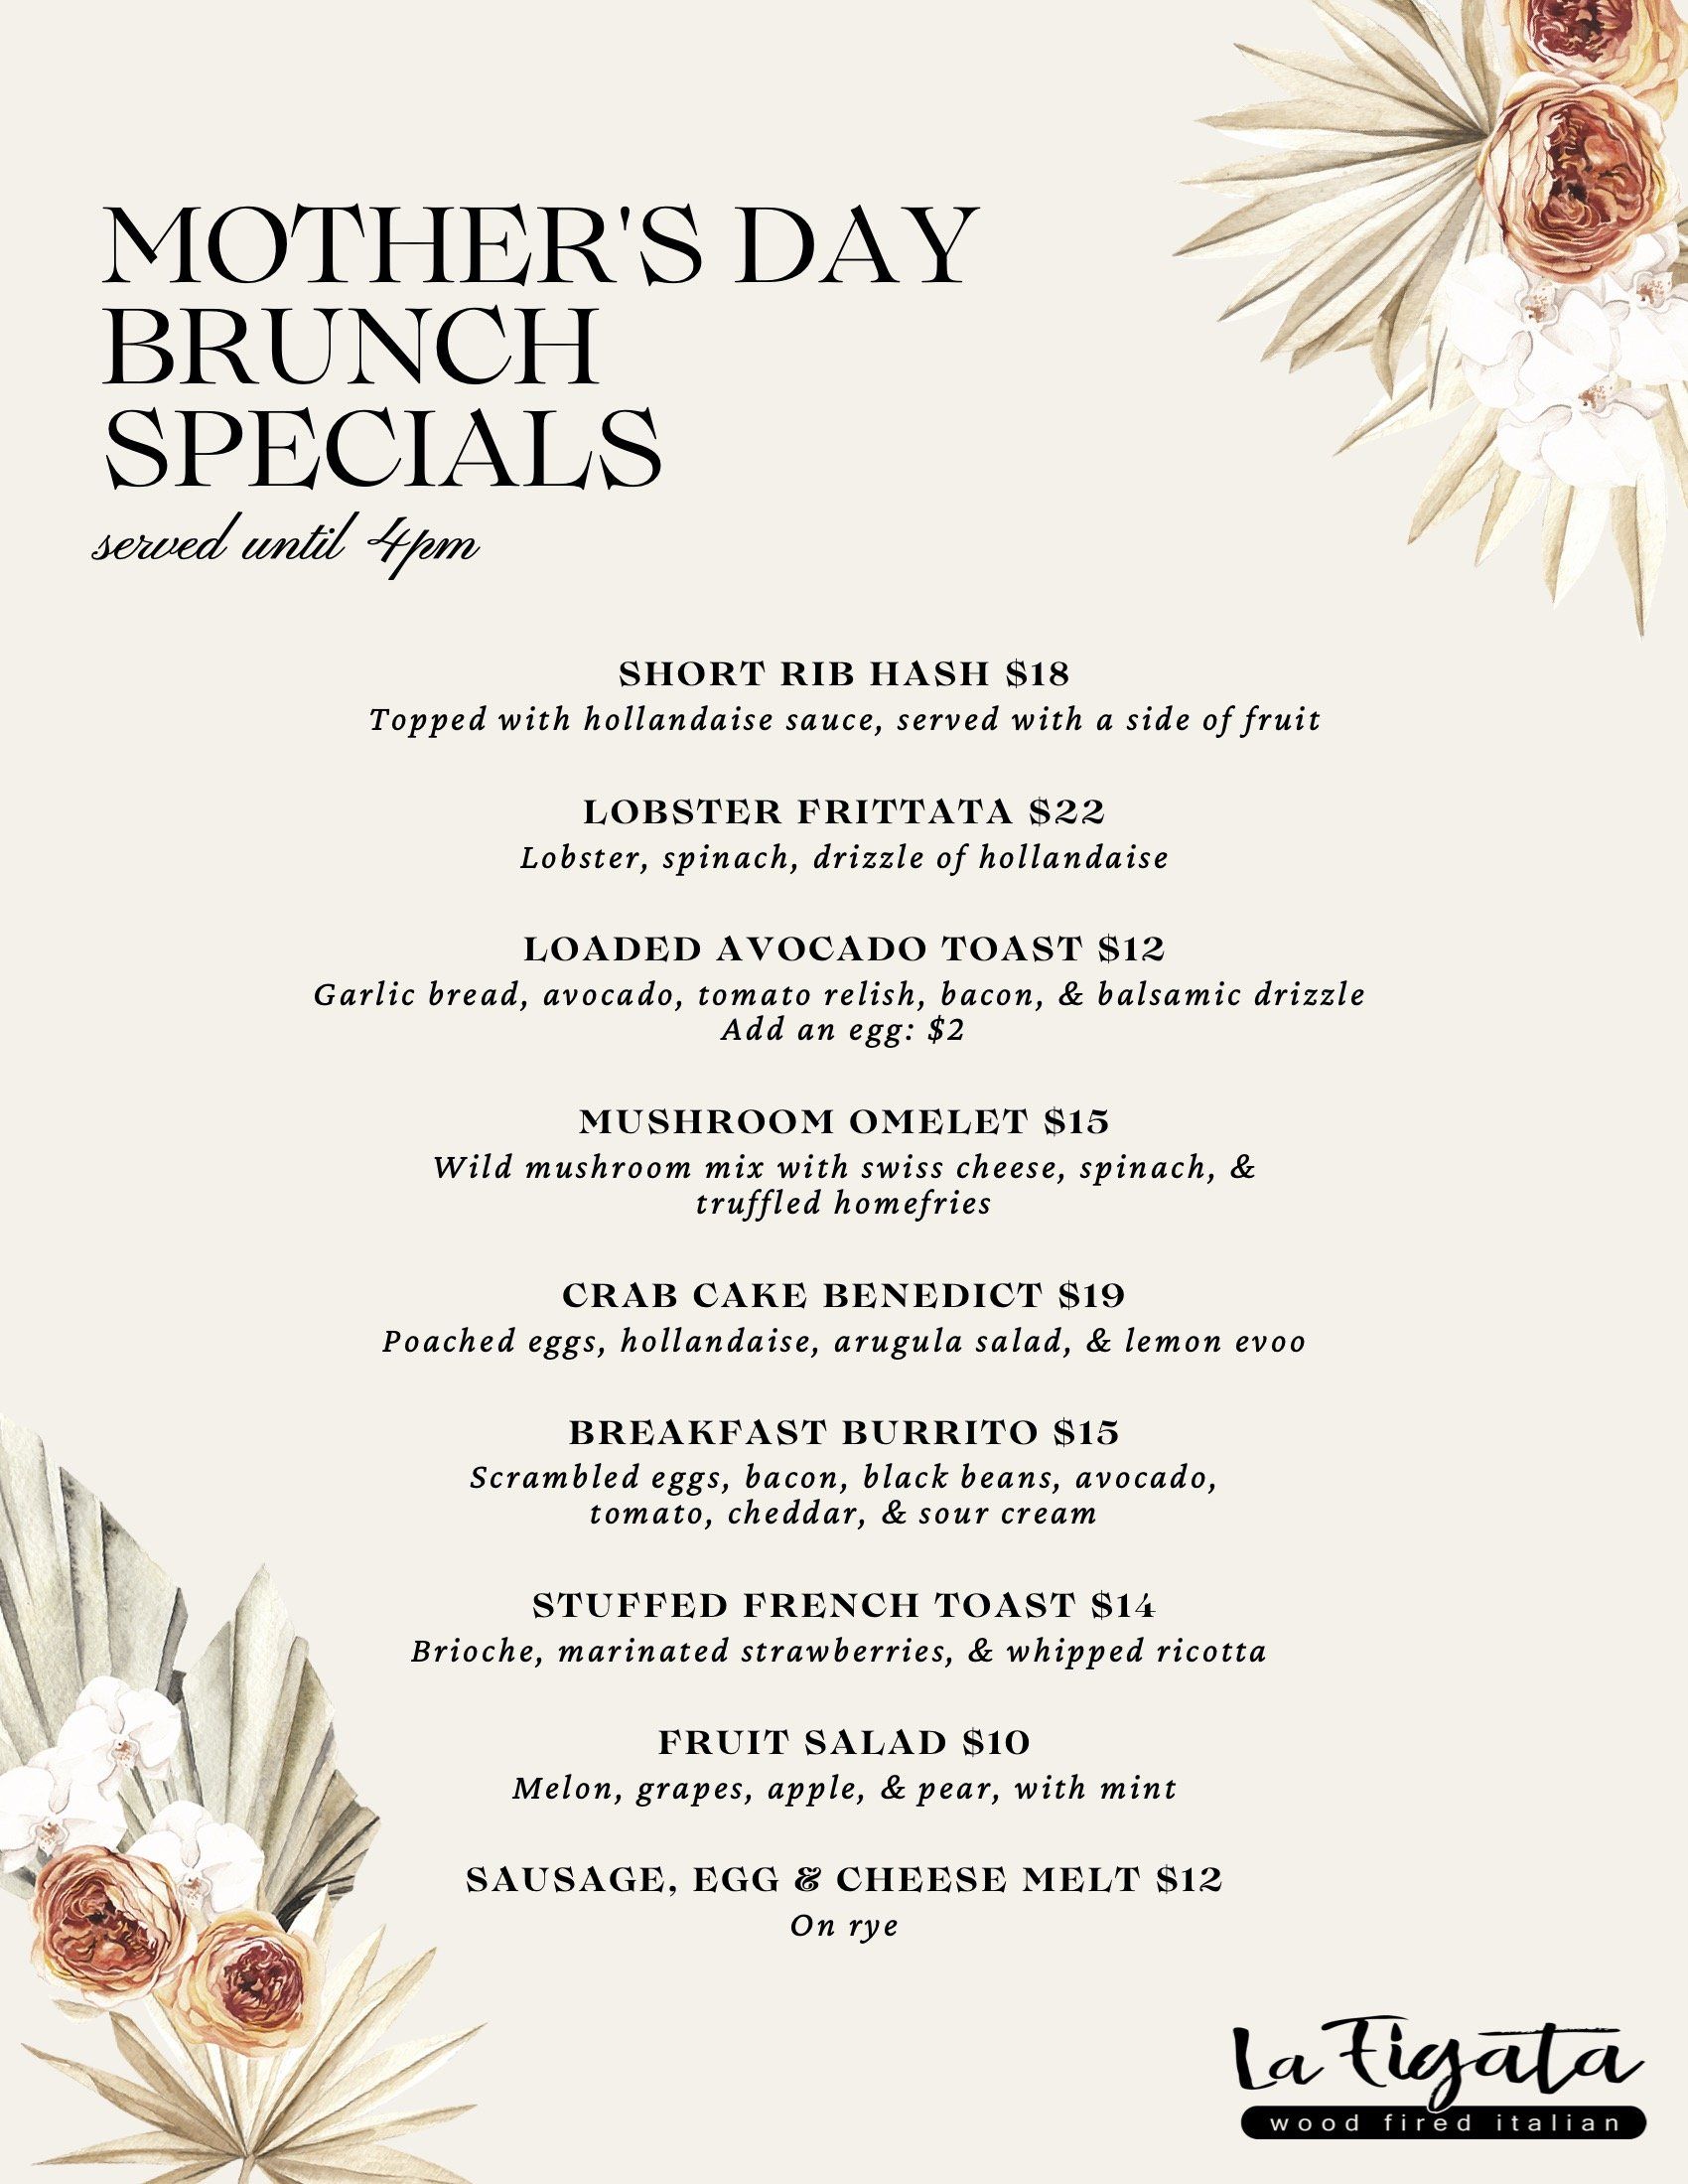 La Figata mother's day brunch specials for May 8th 2022